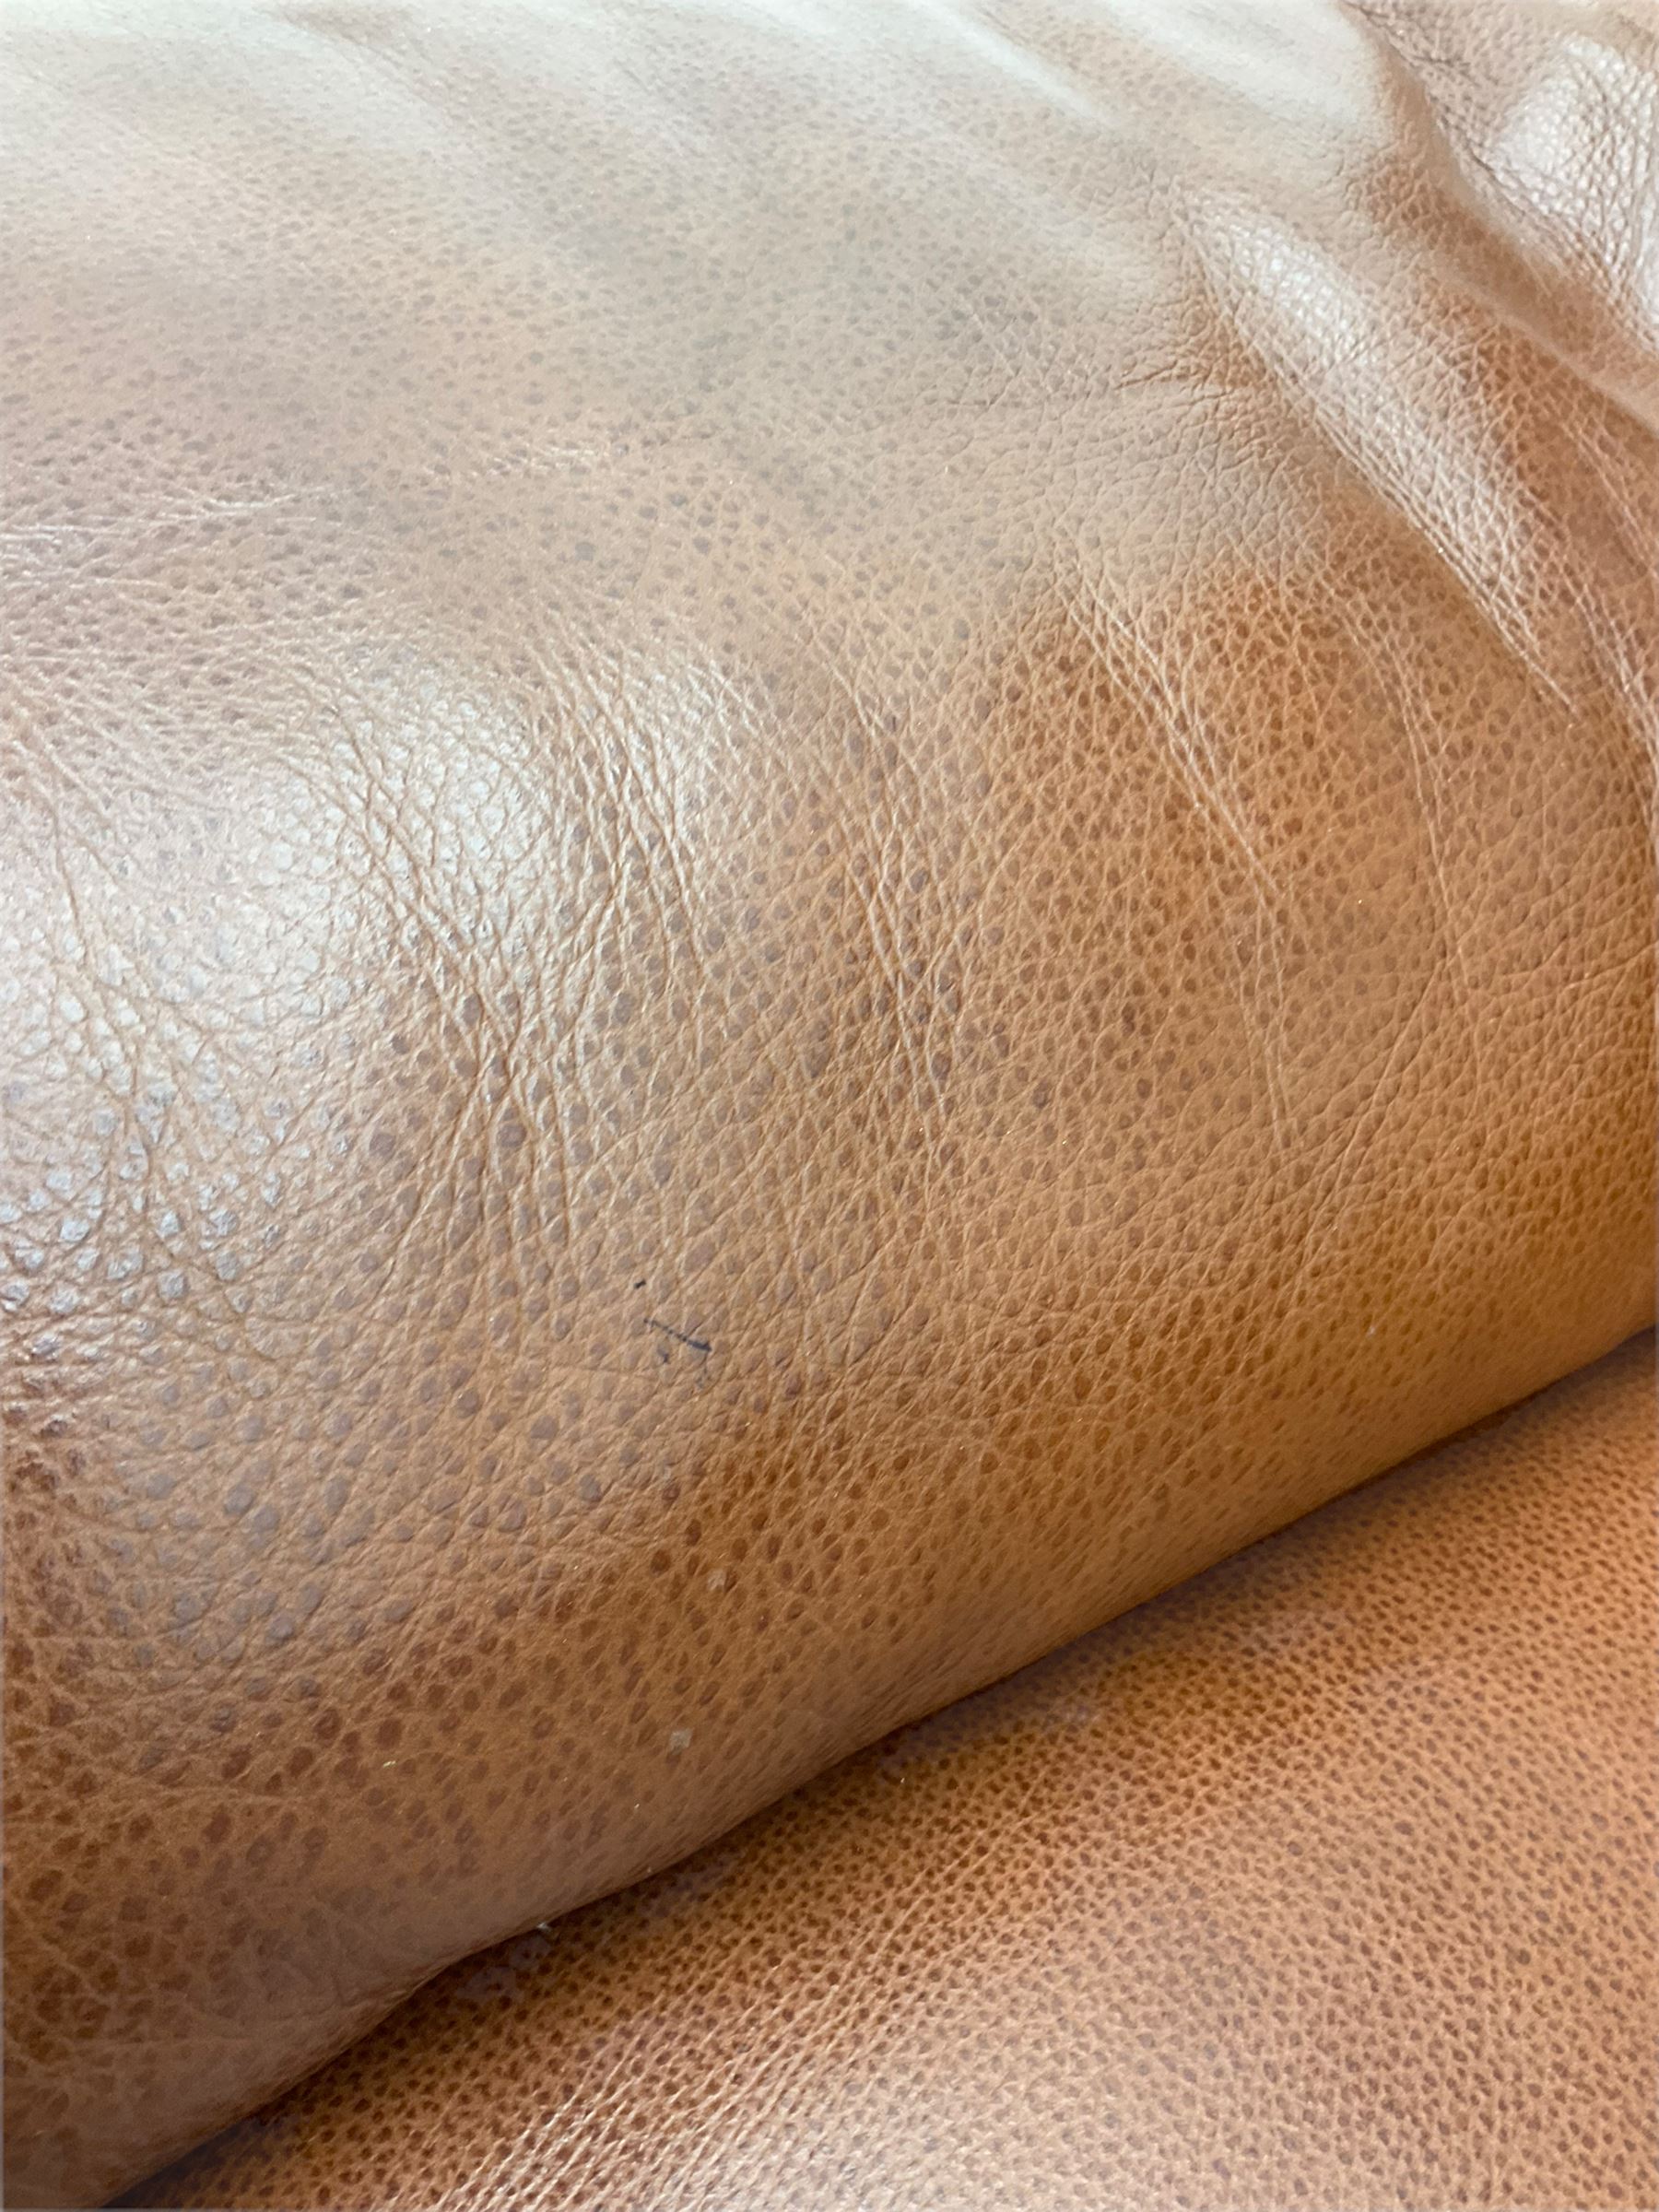 Three electric reclining sofa upholstered in tan leather - Image 17 of 23